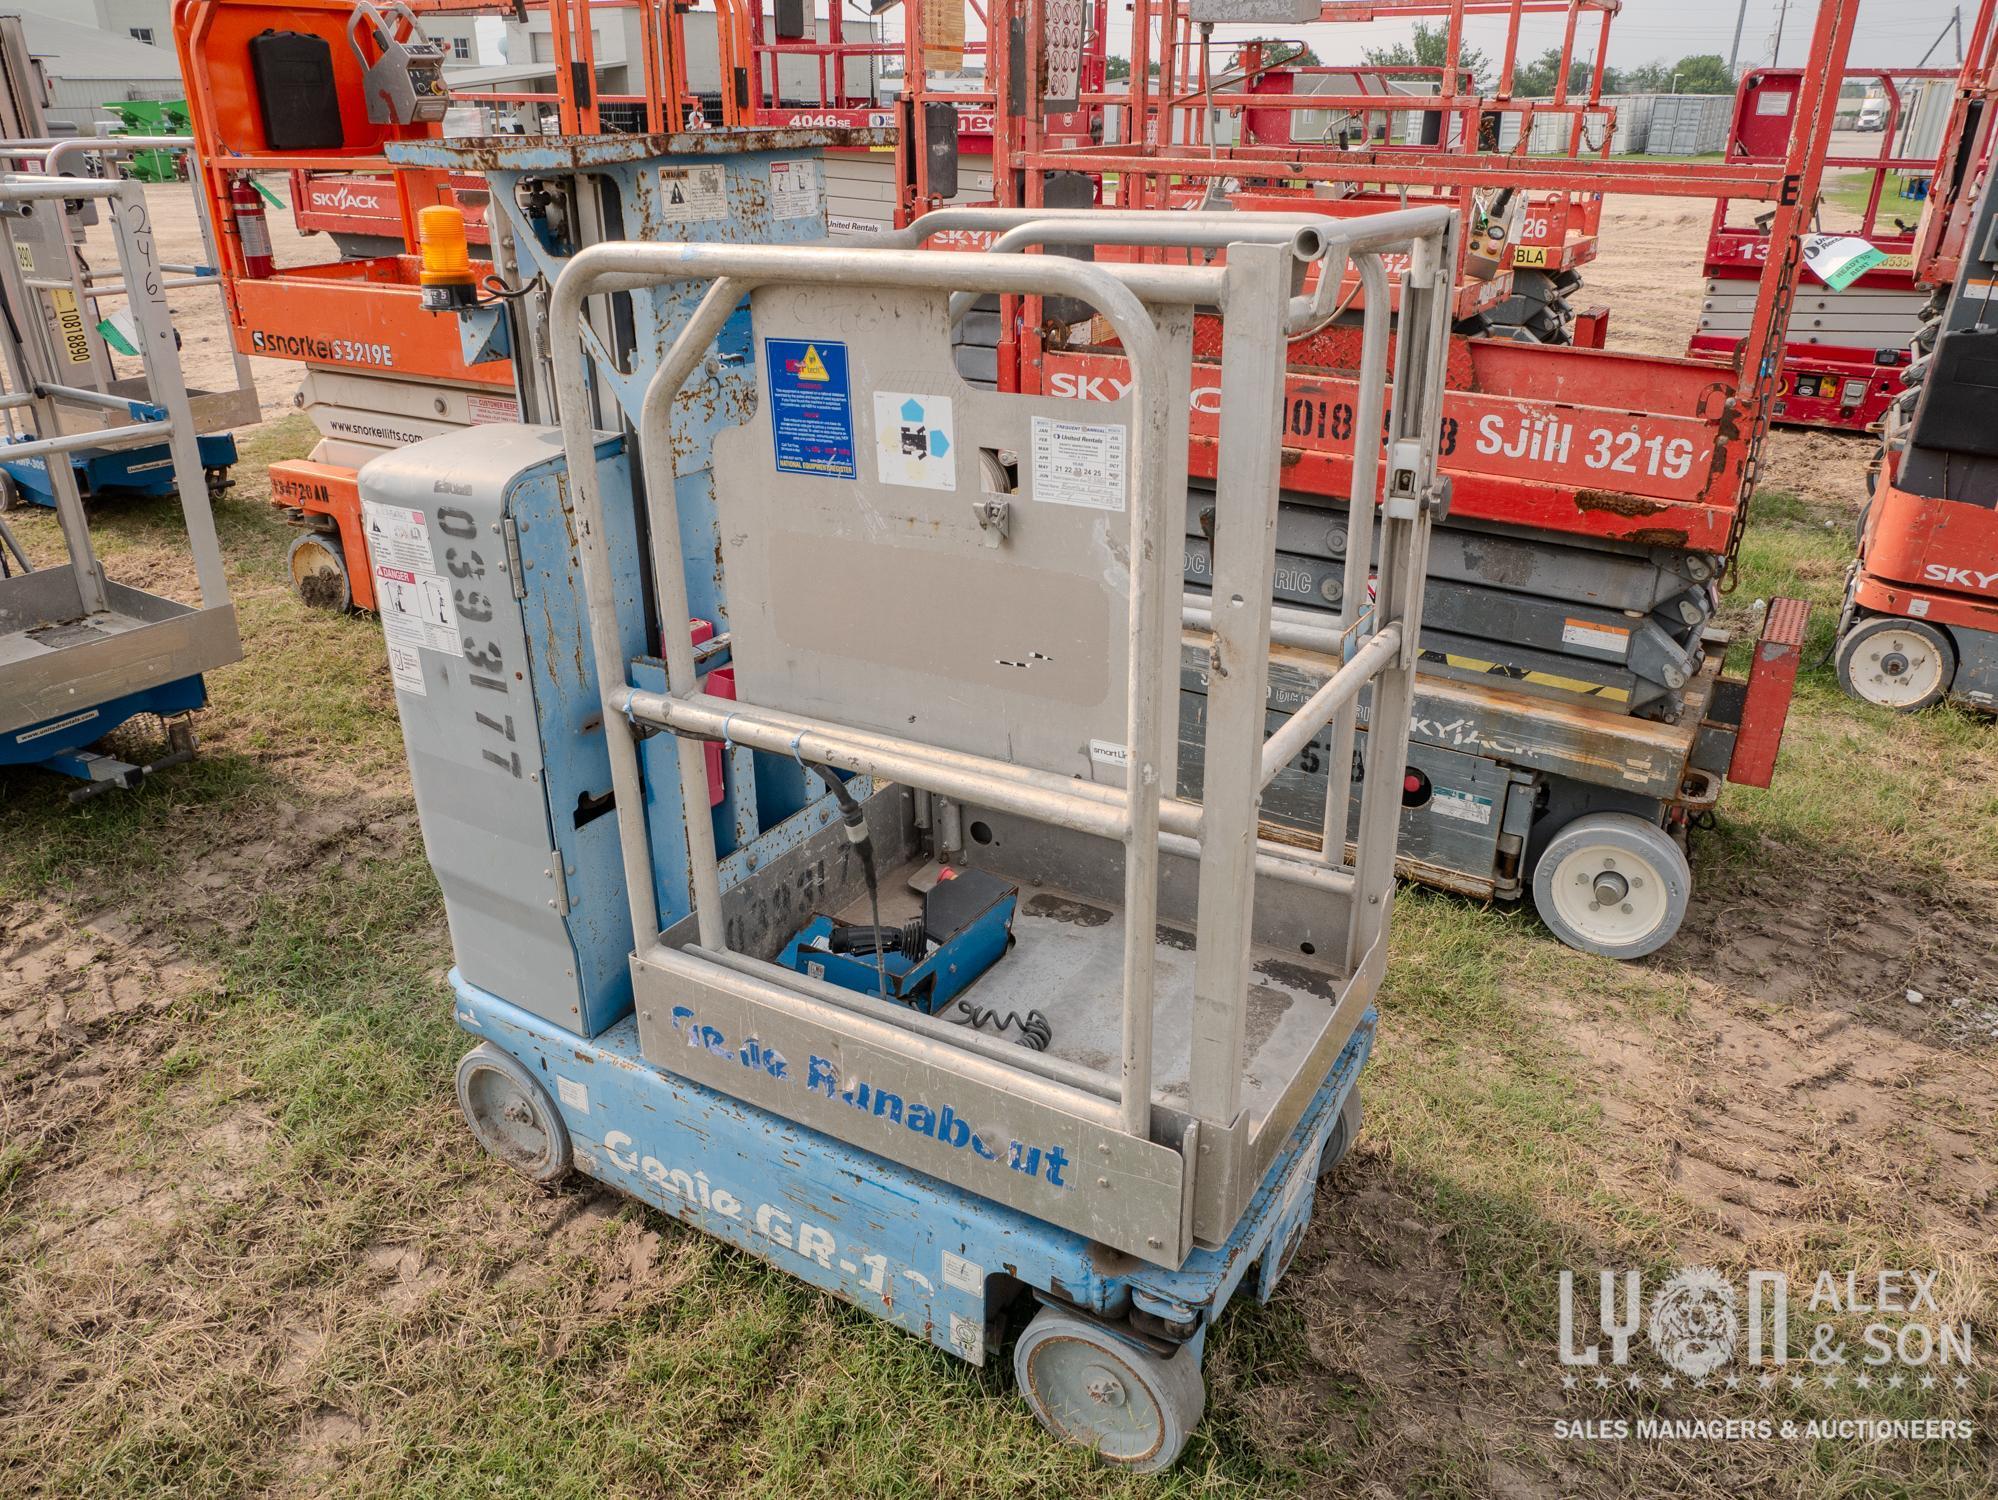 2015 GENIE GR-12 SCISSOR LIFT SN:GR15-39046 electric powered, equipped with 12ft. Platform height.